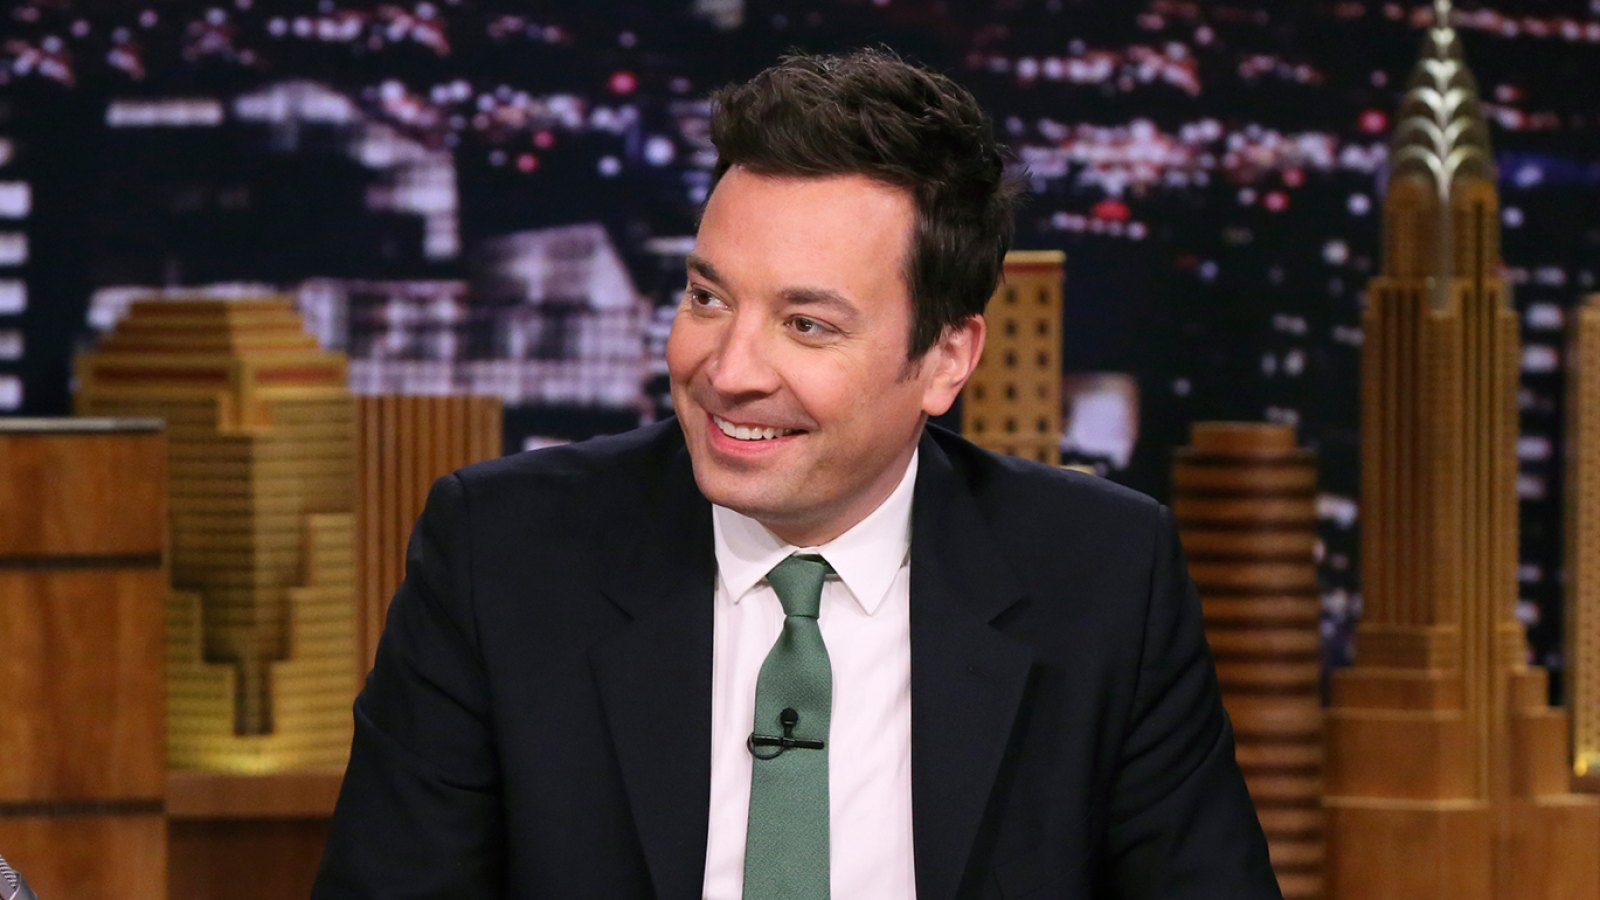 Jimmy Fallon Poured Out Beer to Customers at NYC Bar on St. Paddy’s Day